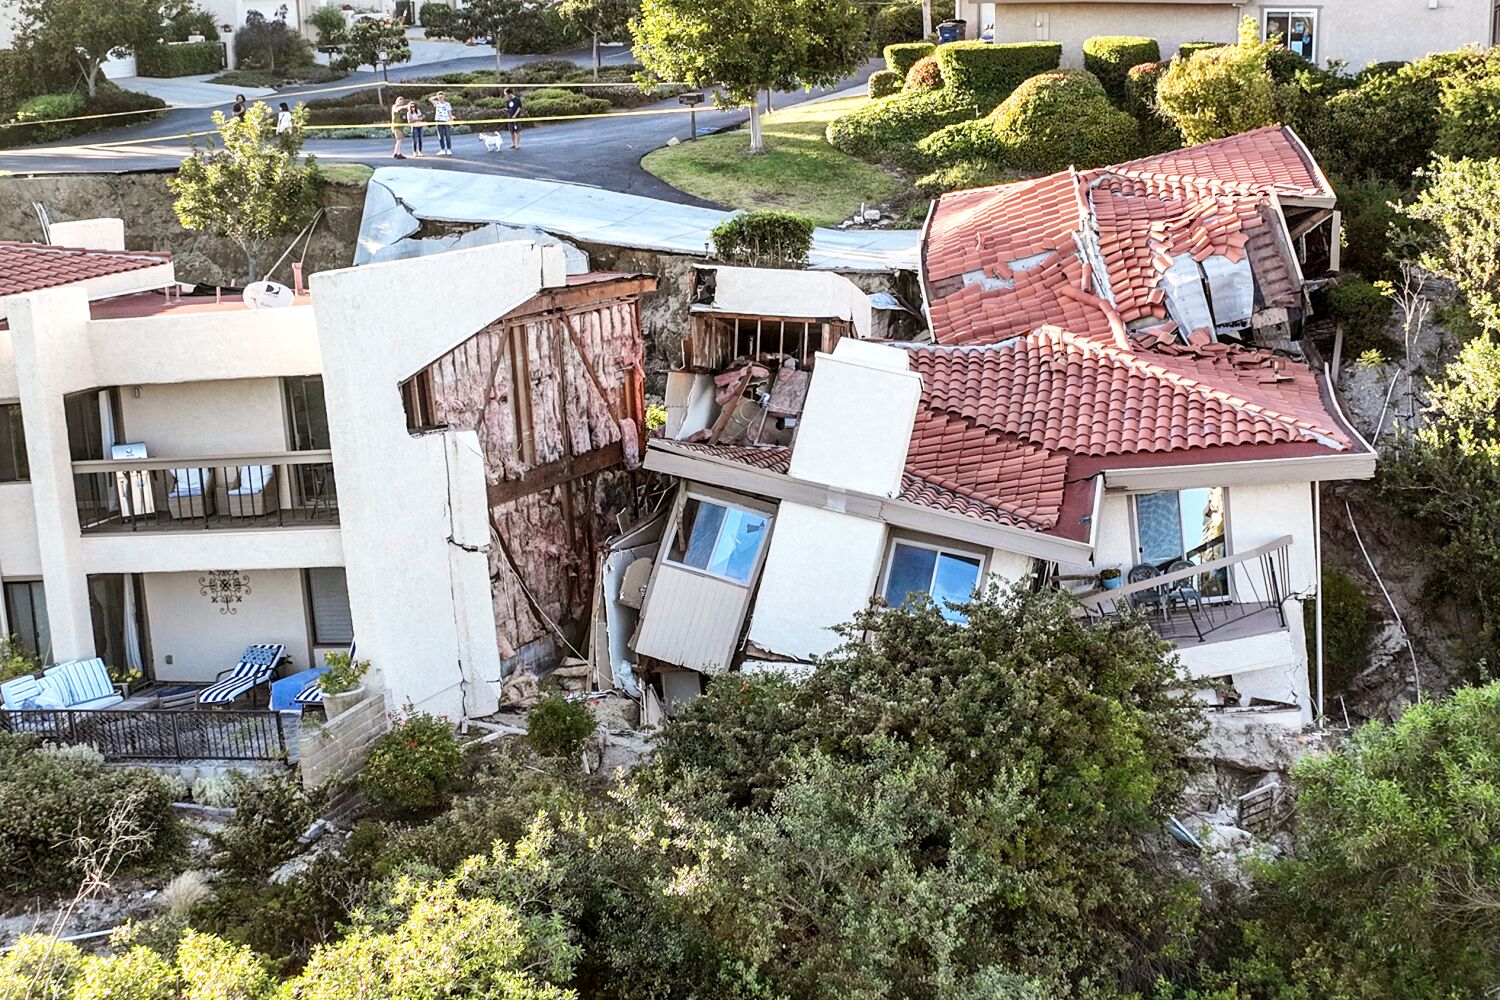  'Astonishing' collapse sends Rolling Hills Estates homes toward canyon floor